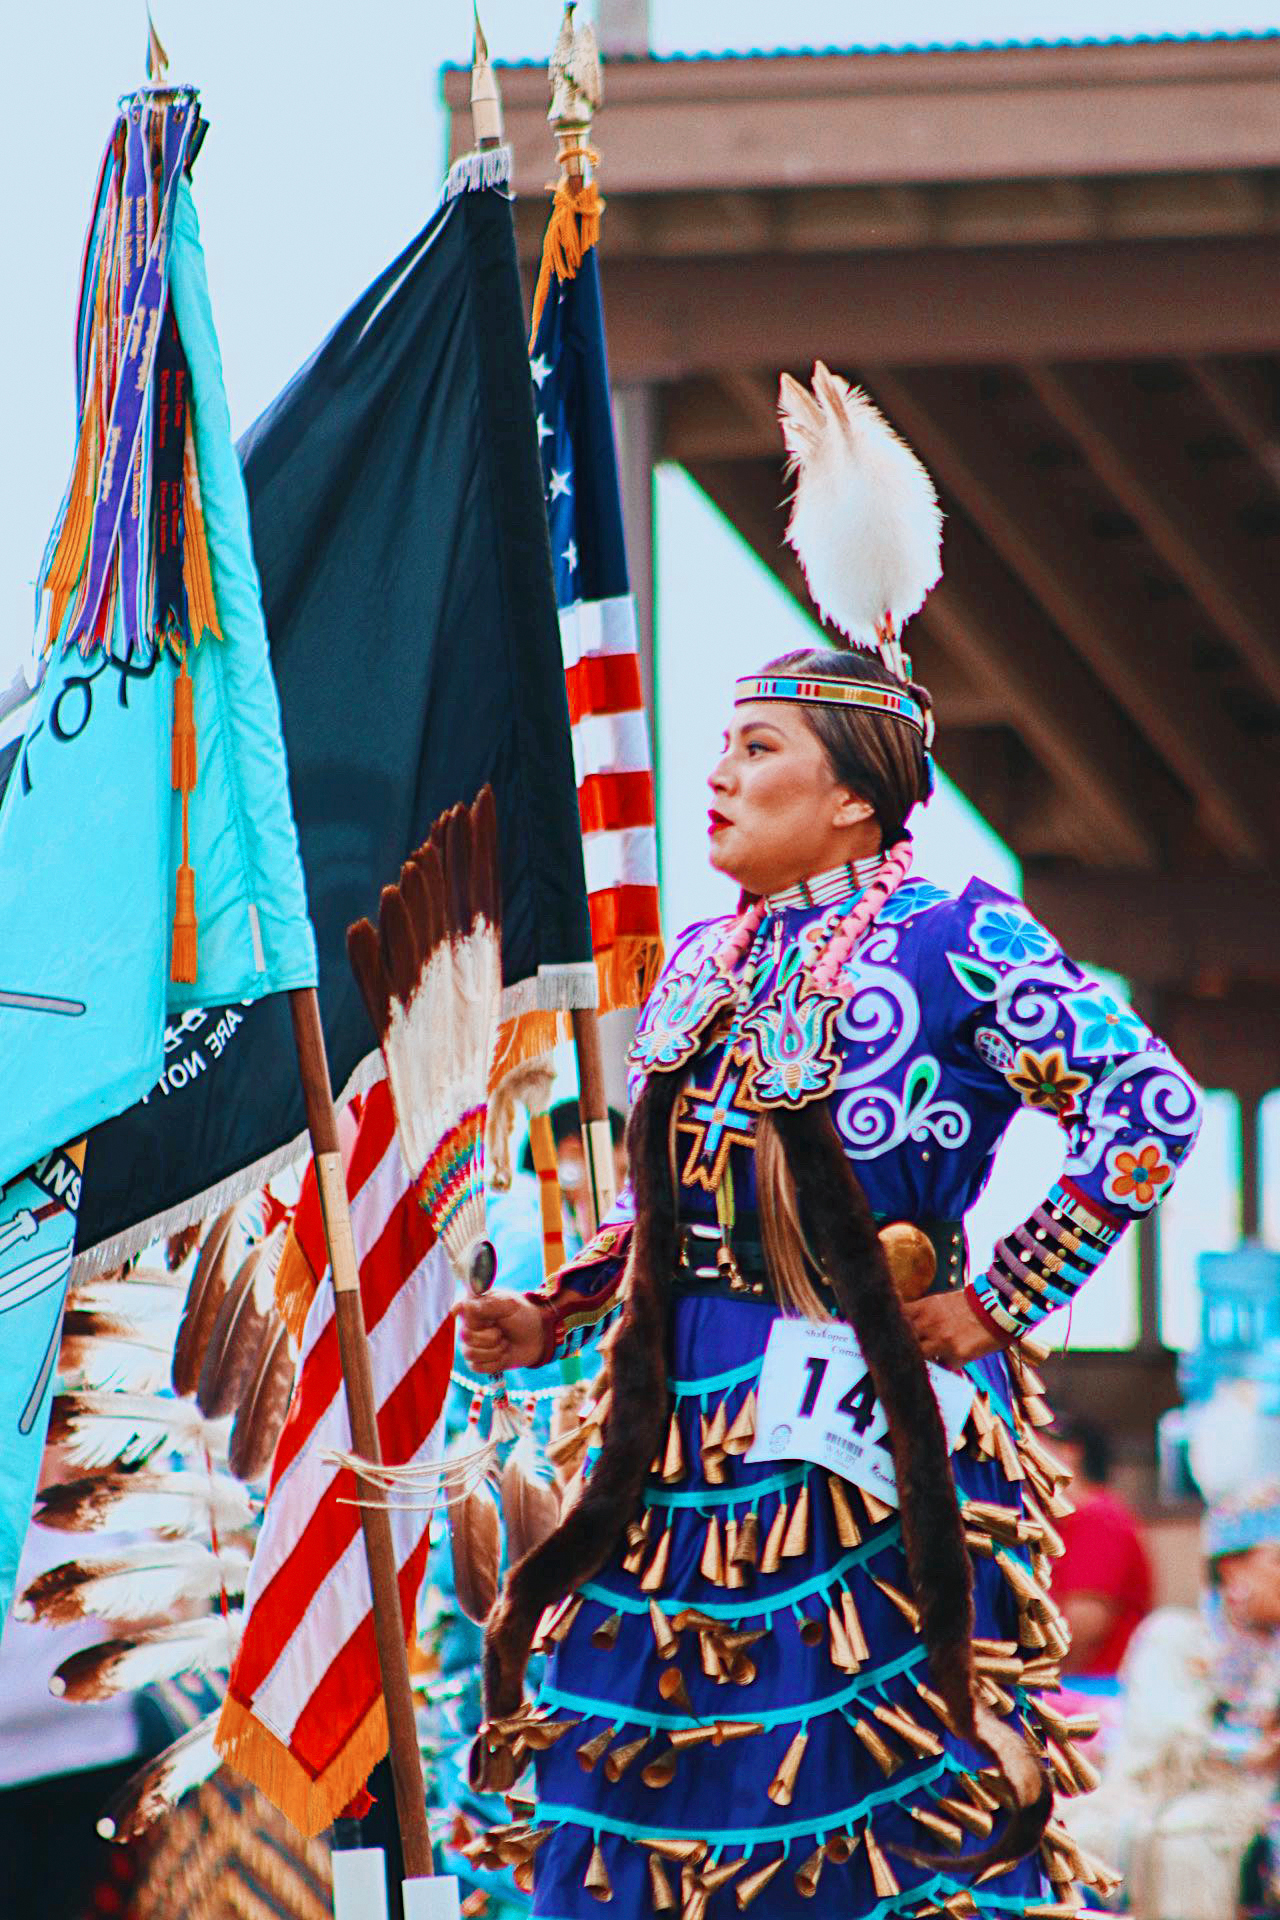 Kendorina Redhouse stands next to a Native American flag and the US flag in traditional clothing, her long purple dress adorned with brightly colored wooden beads and embroidery. She wears a feather headdress and moccasins and holds with a fan made of feathers.